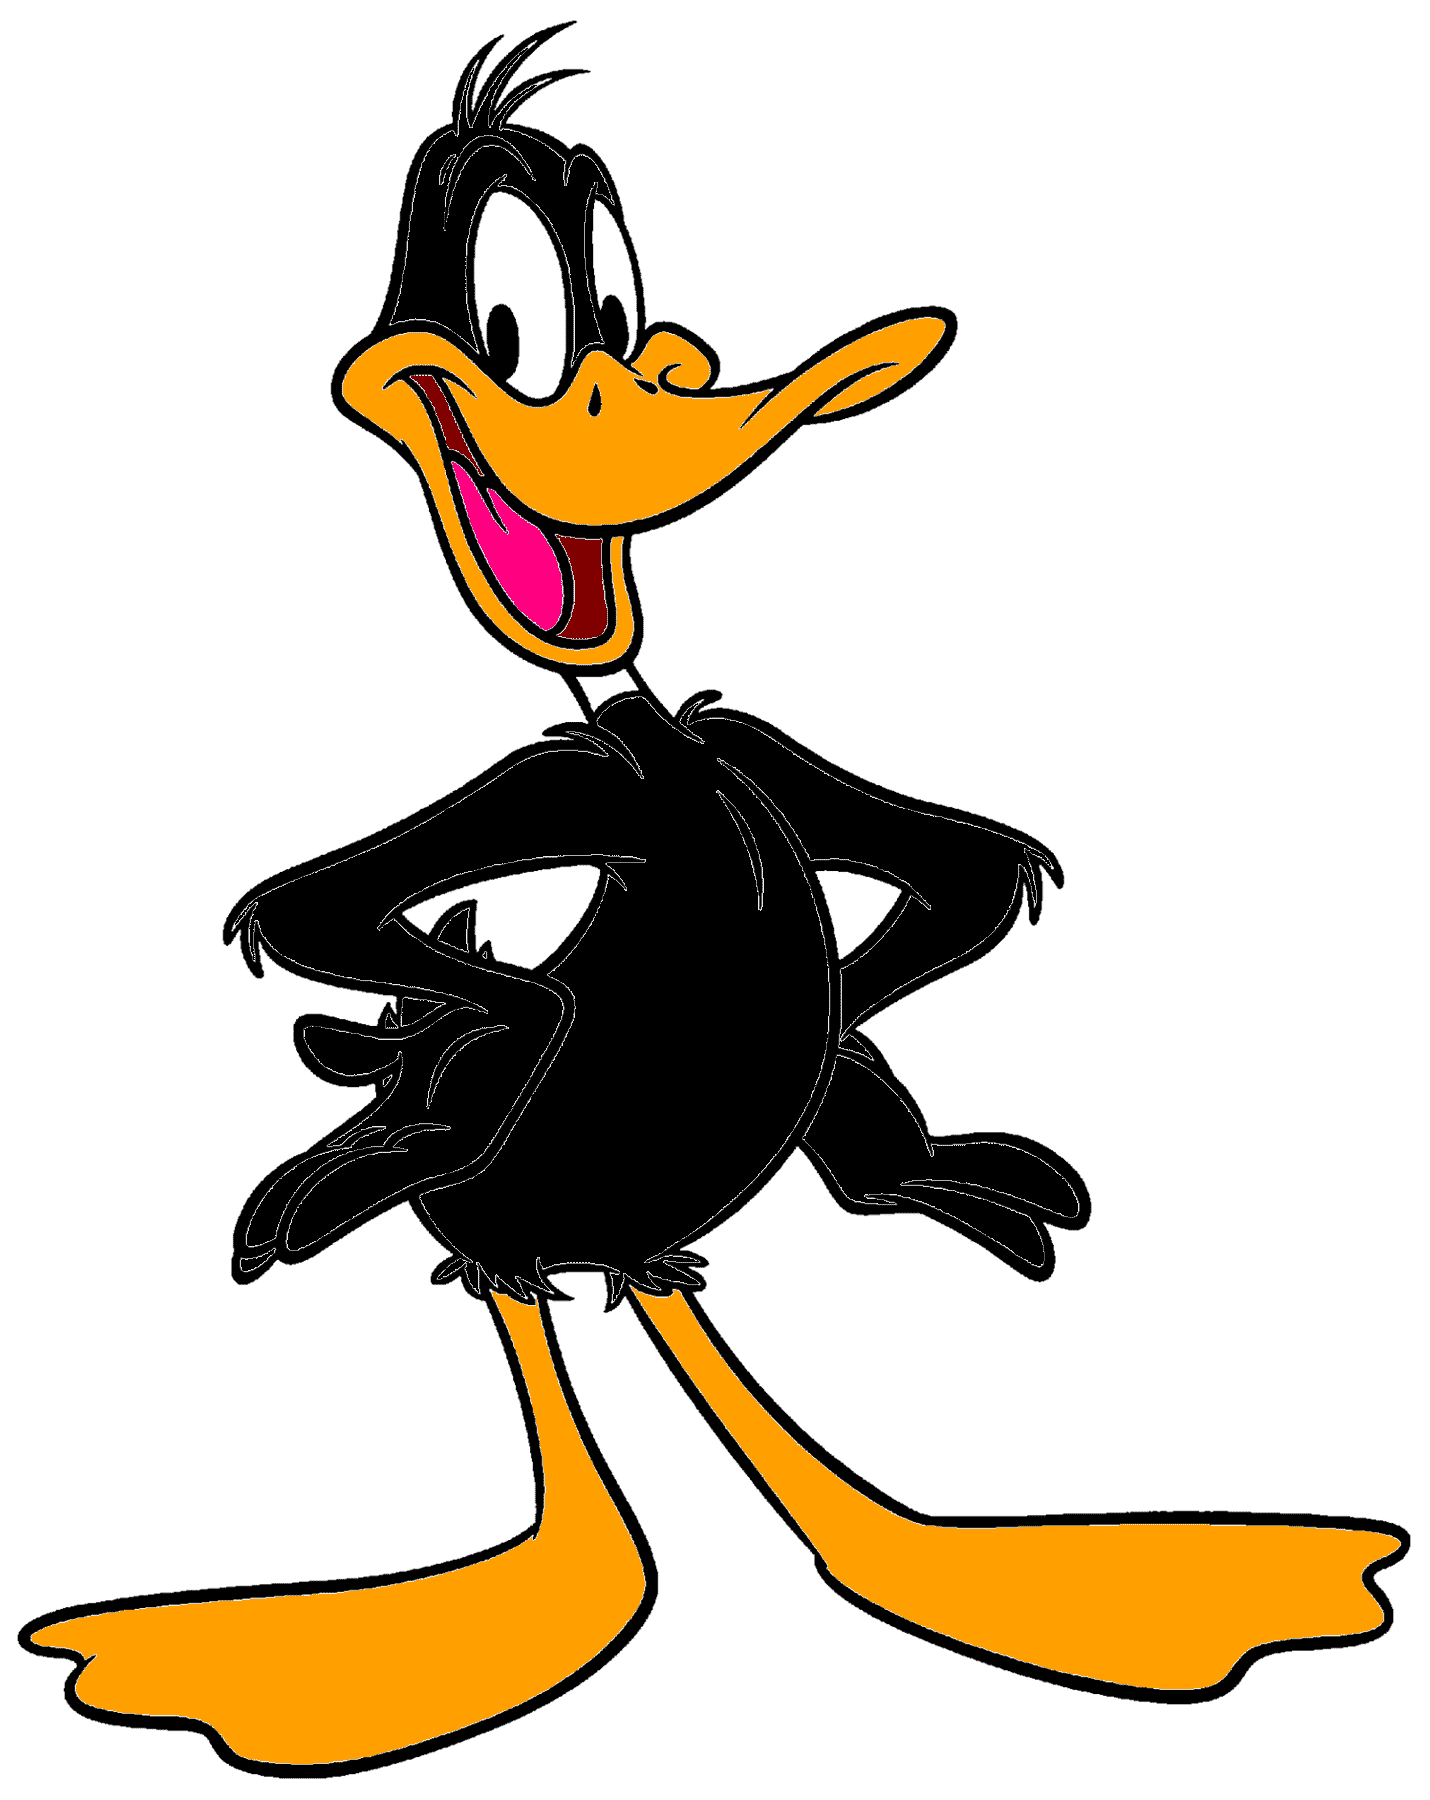 Daffy-Duck-psd43636.png